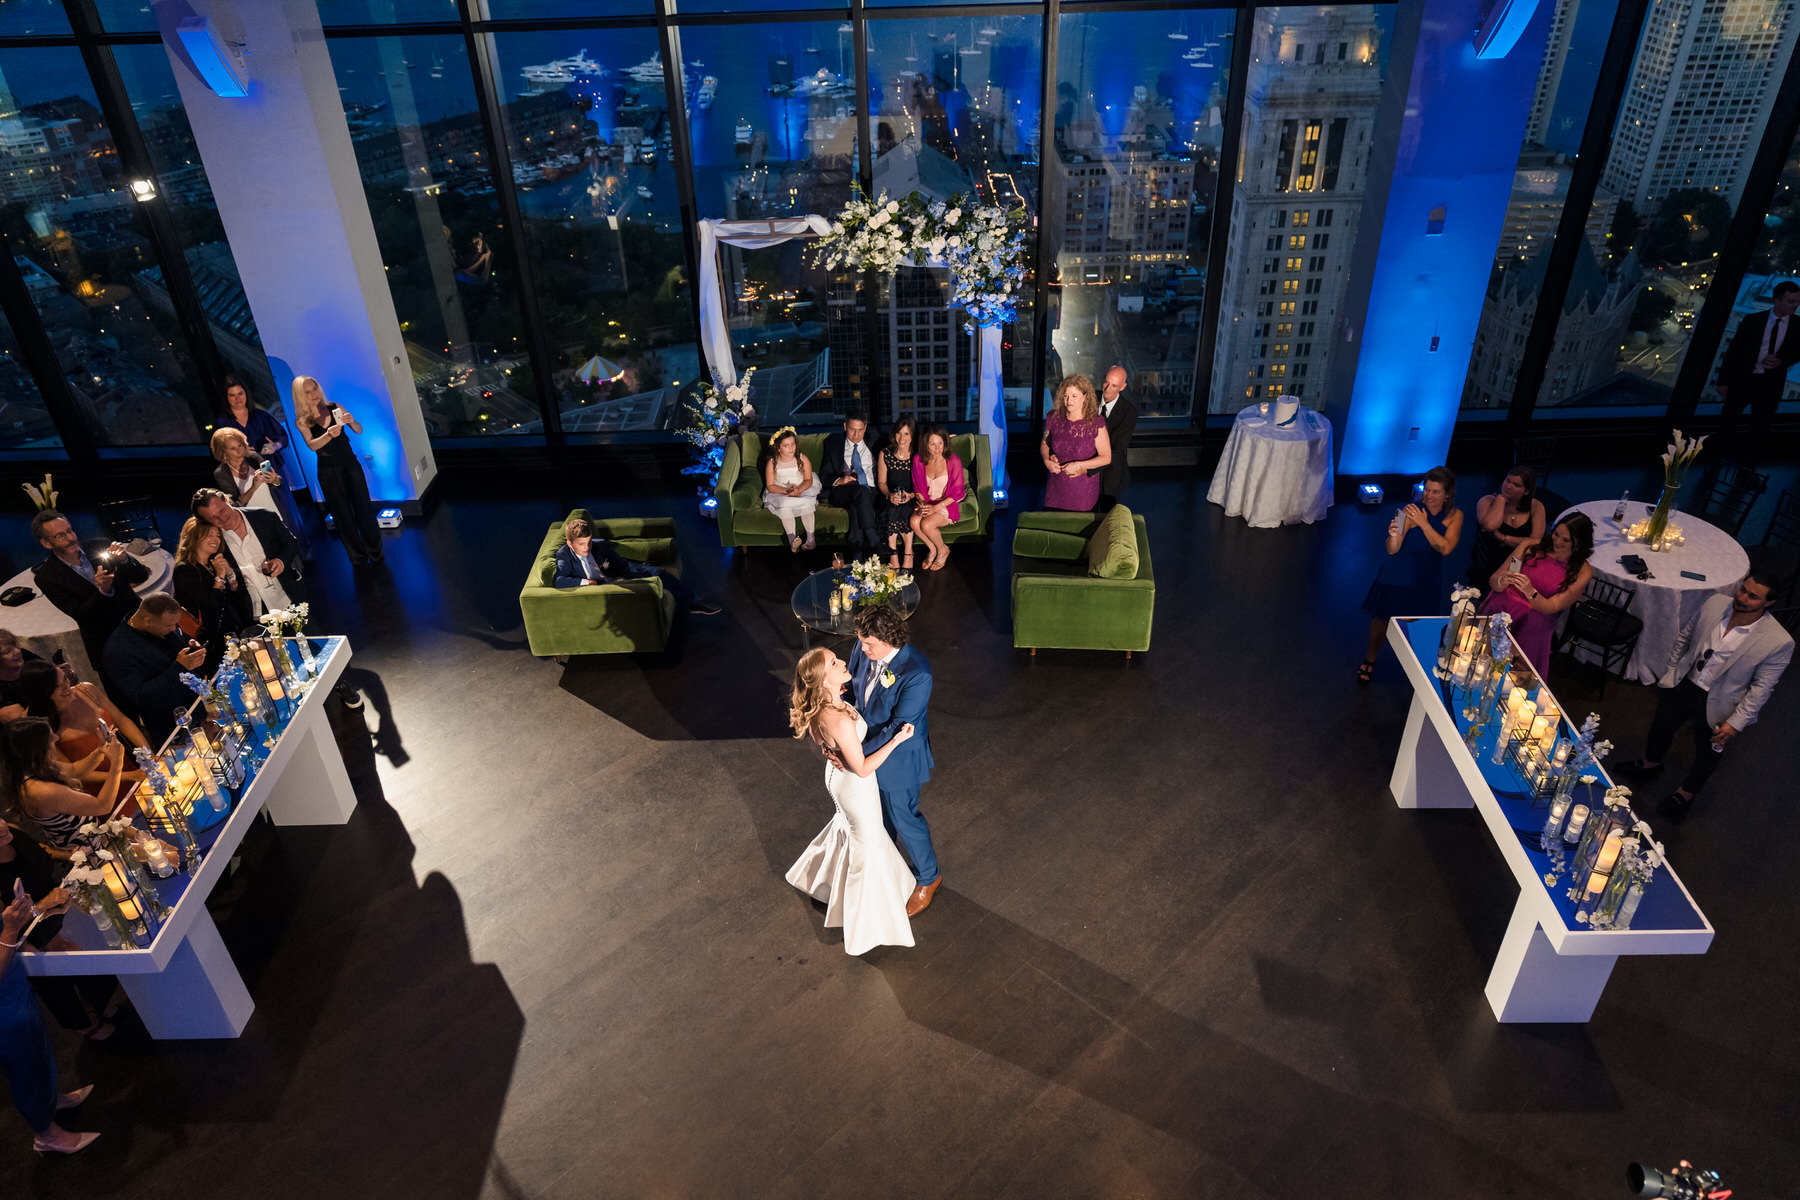 a bride and groom share their first dance at their wedding reception.